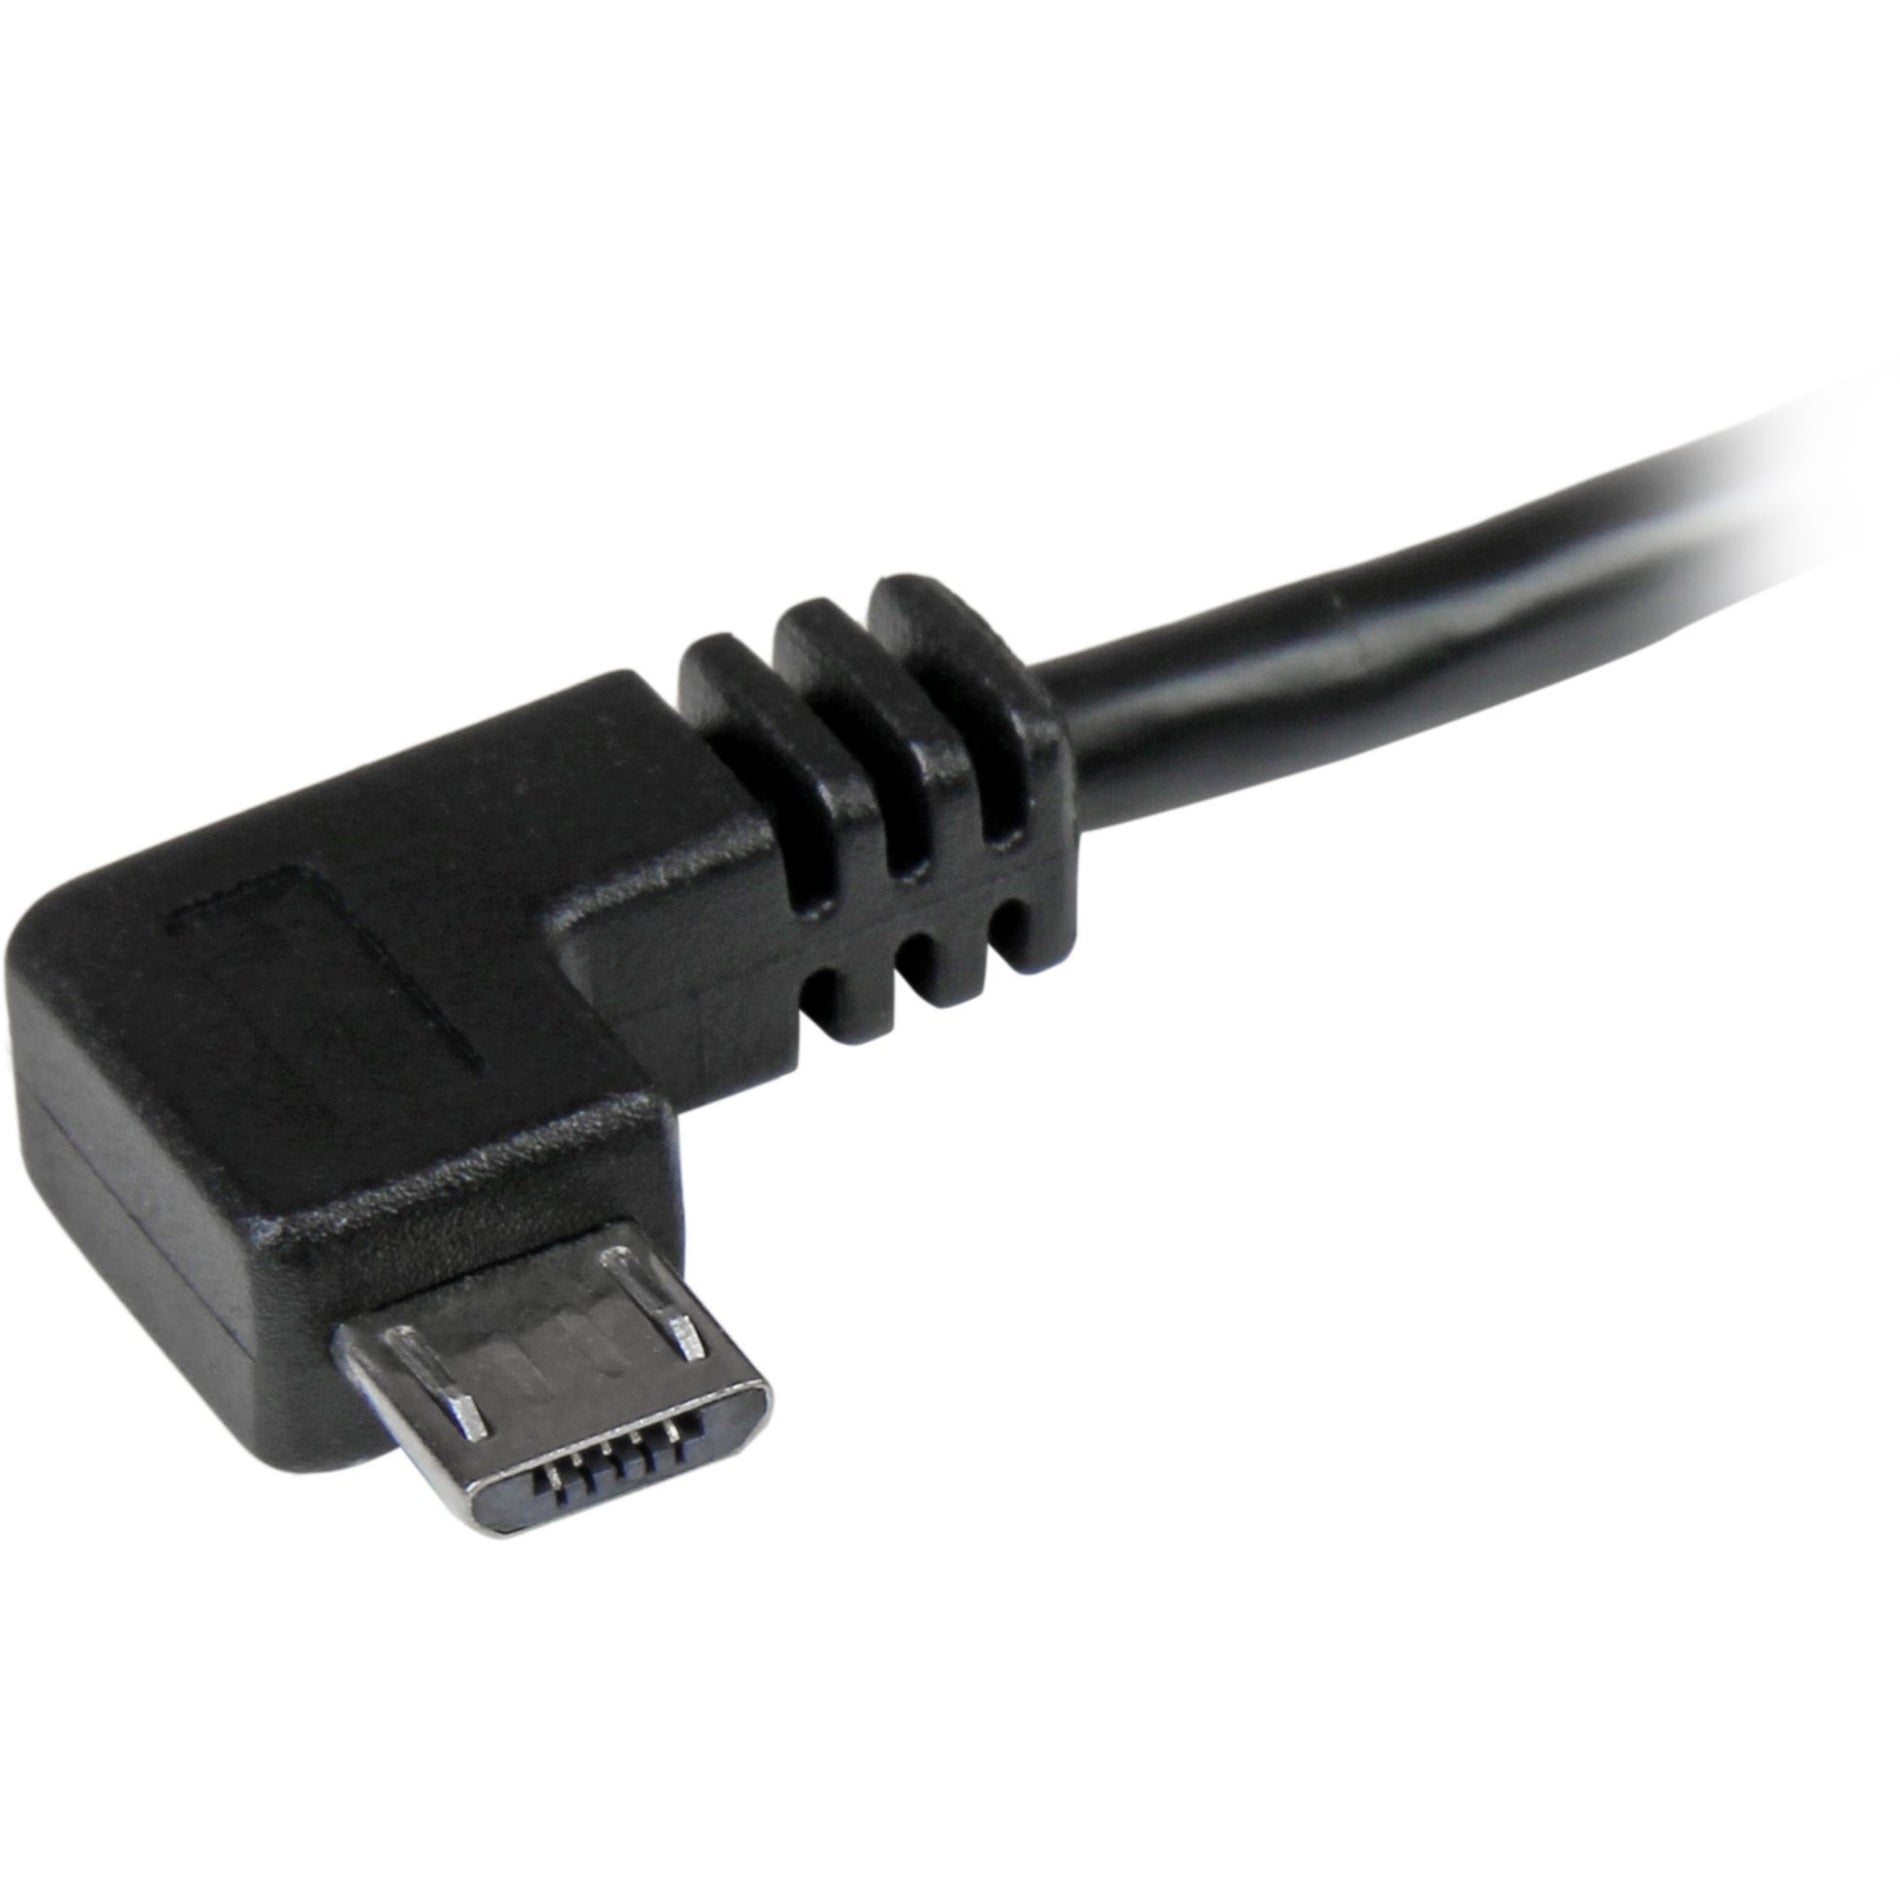 StarTech.com USB2AUB2RA1M Micro-USB Cable with Right-Angled Connectors - M/M - 1m (3ft), Fast Data Transfer, Black